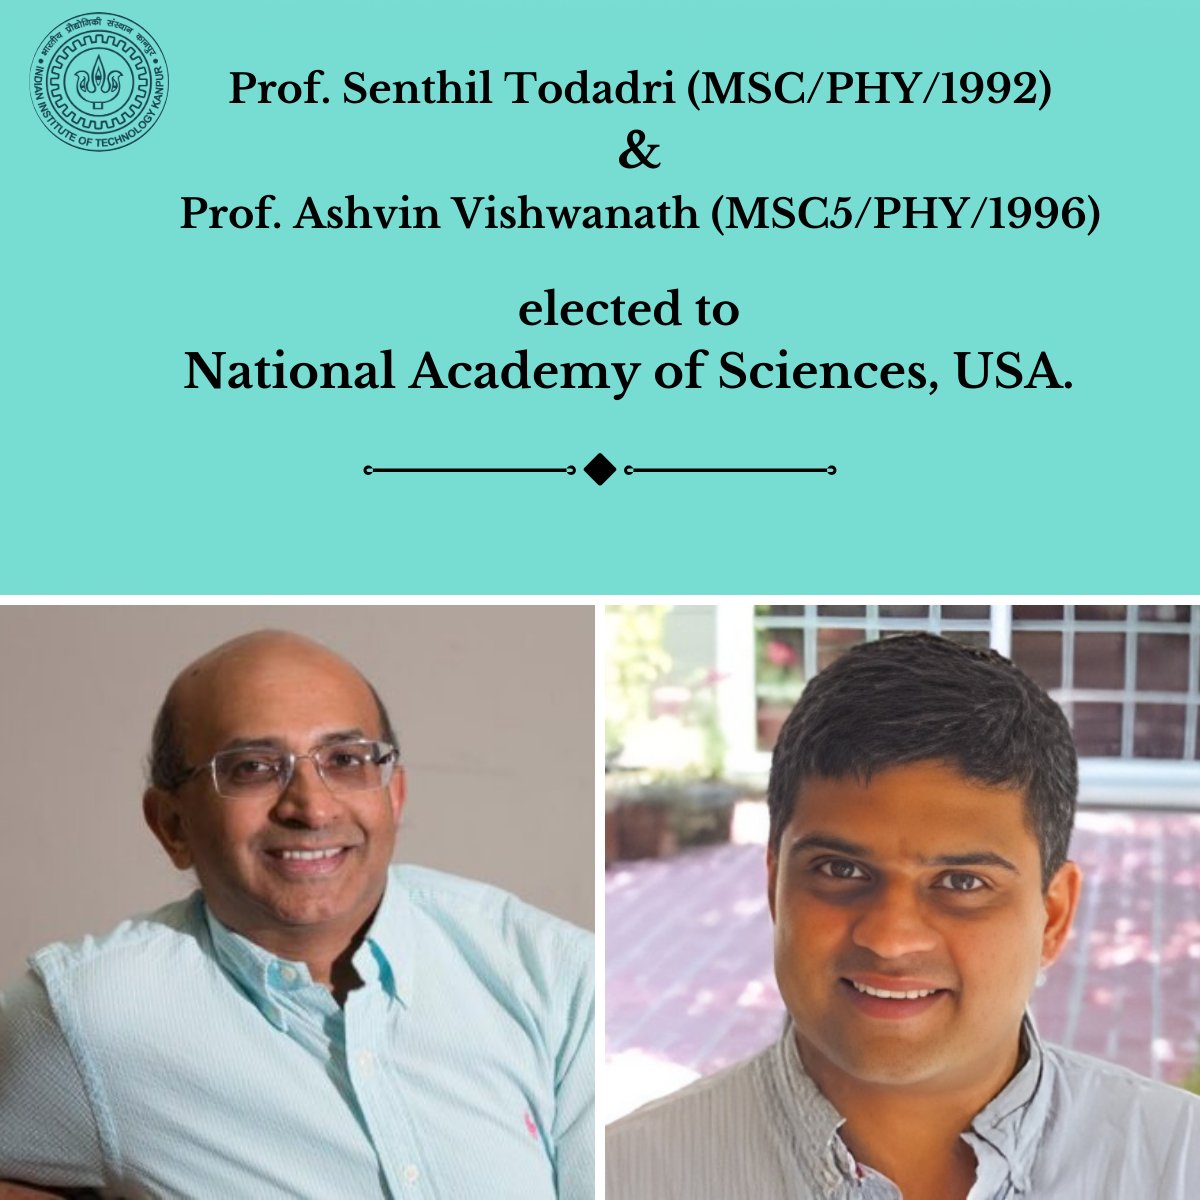 Our heartfelt congratulations to Prof. Senthil Todadri and Prof. Ashvin Vishwanath on getting elected to the National Academy of Sciences, USA. Prof. Todadri, Prof. of #Physics at #MIT, works in the areas of #novel phases and #phase #transitions of #quantum #matter...